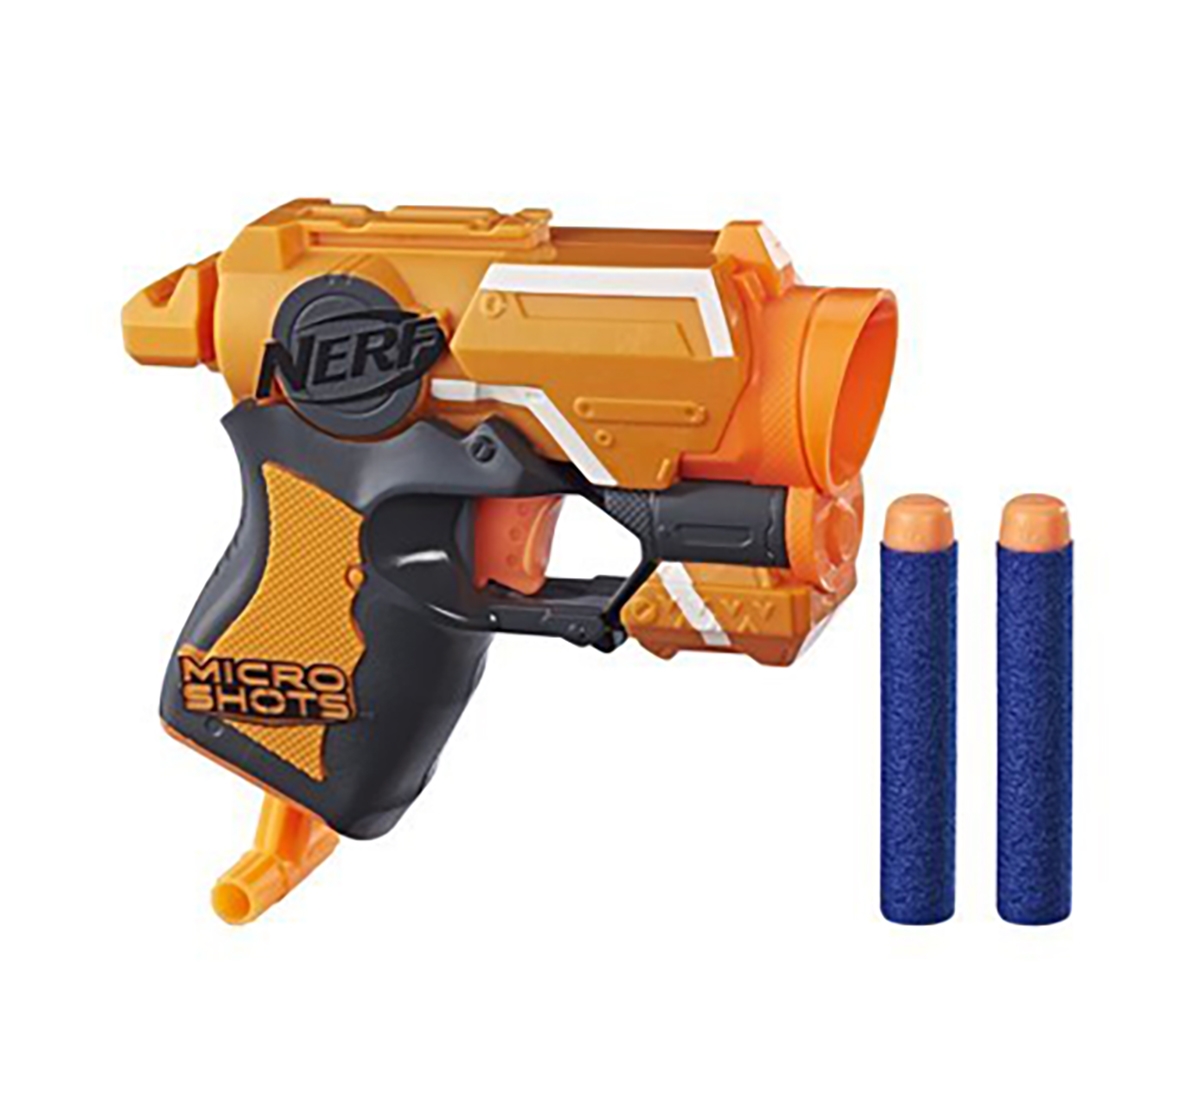 Nerf | Nerf Microshots Blaster and Combats Assorted Blasters for Kids age 8Y+ 1